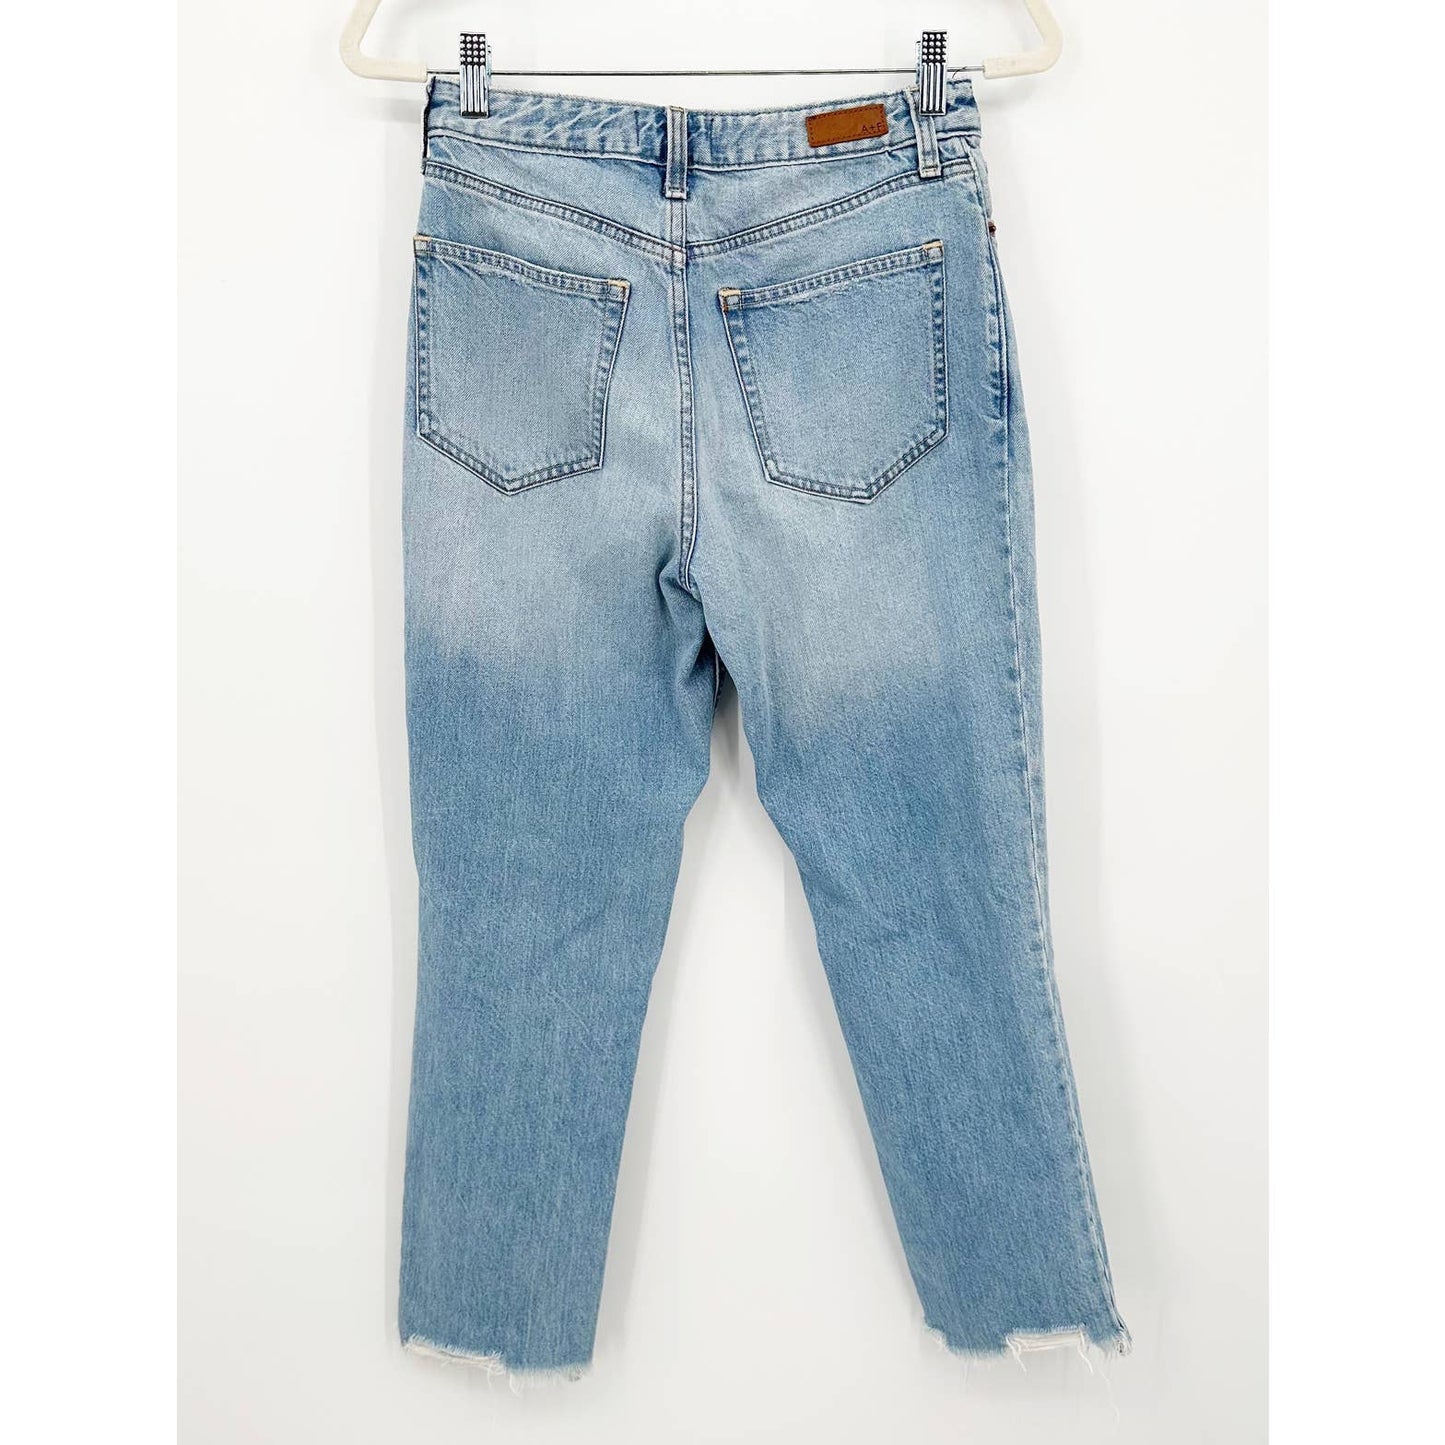 Abercrombie & Fitch Annie Girlfriend High Rise Distressed Jeans 2